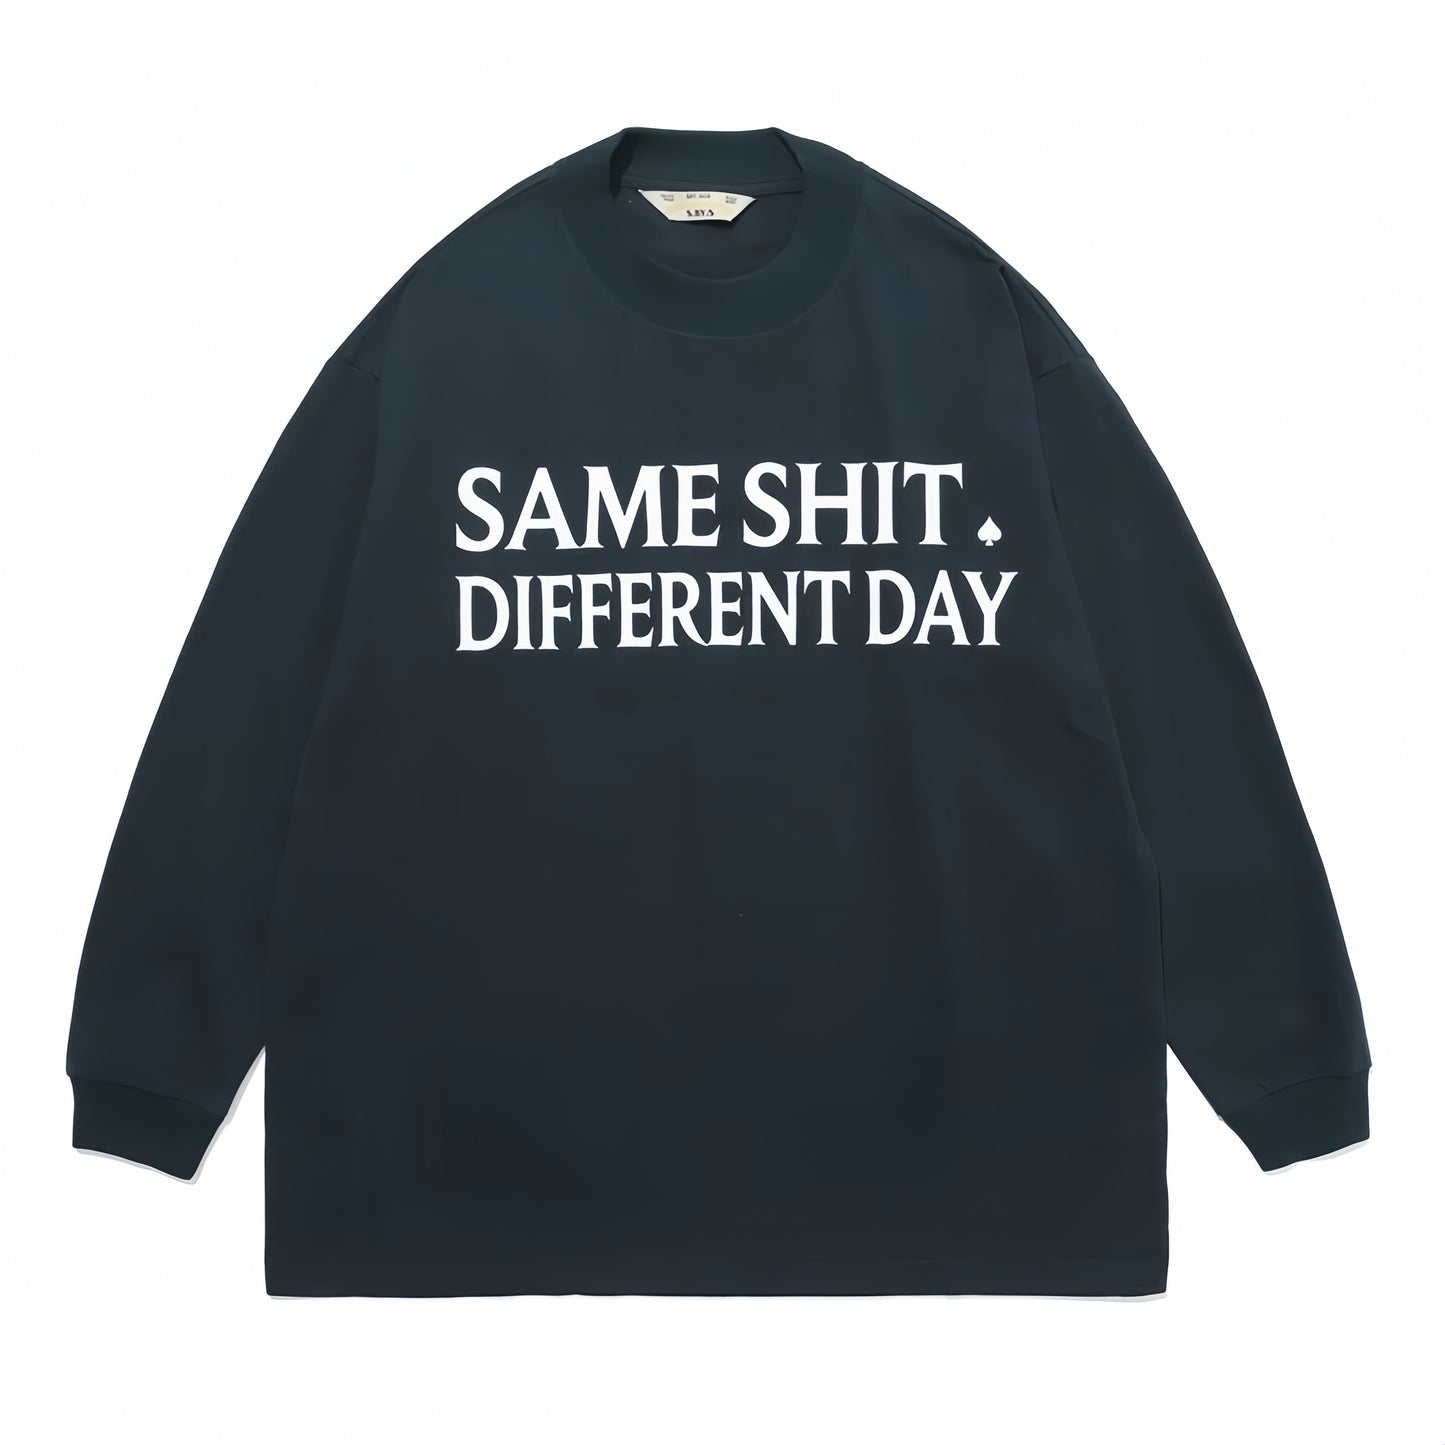 SAME SHIT DIFFERENT DAY